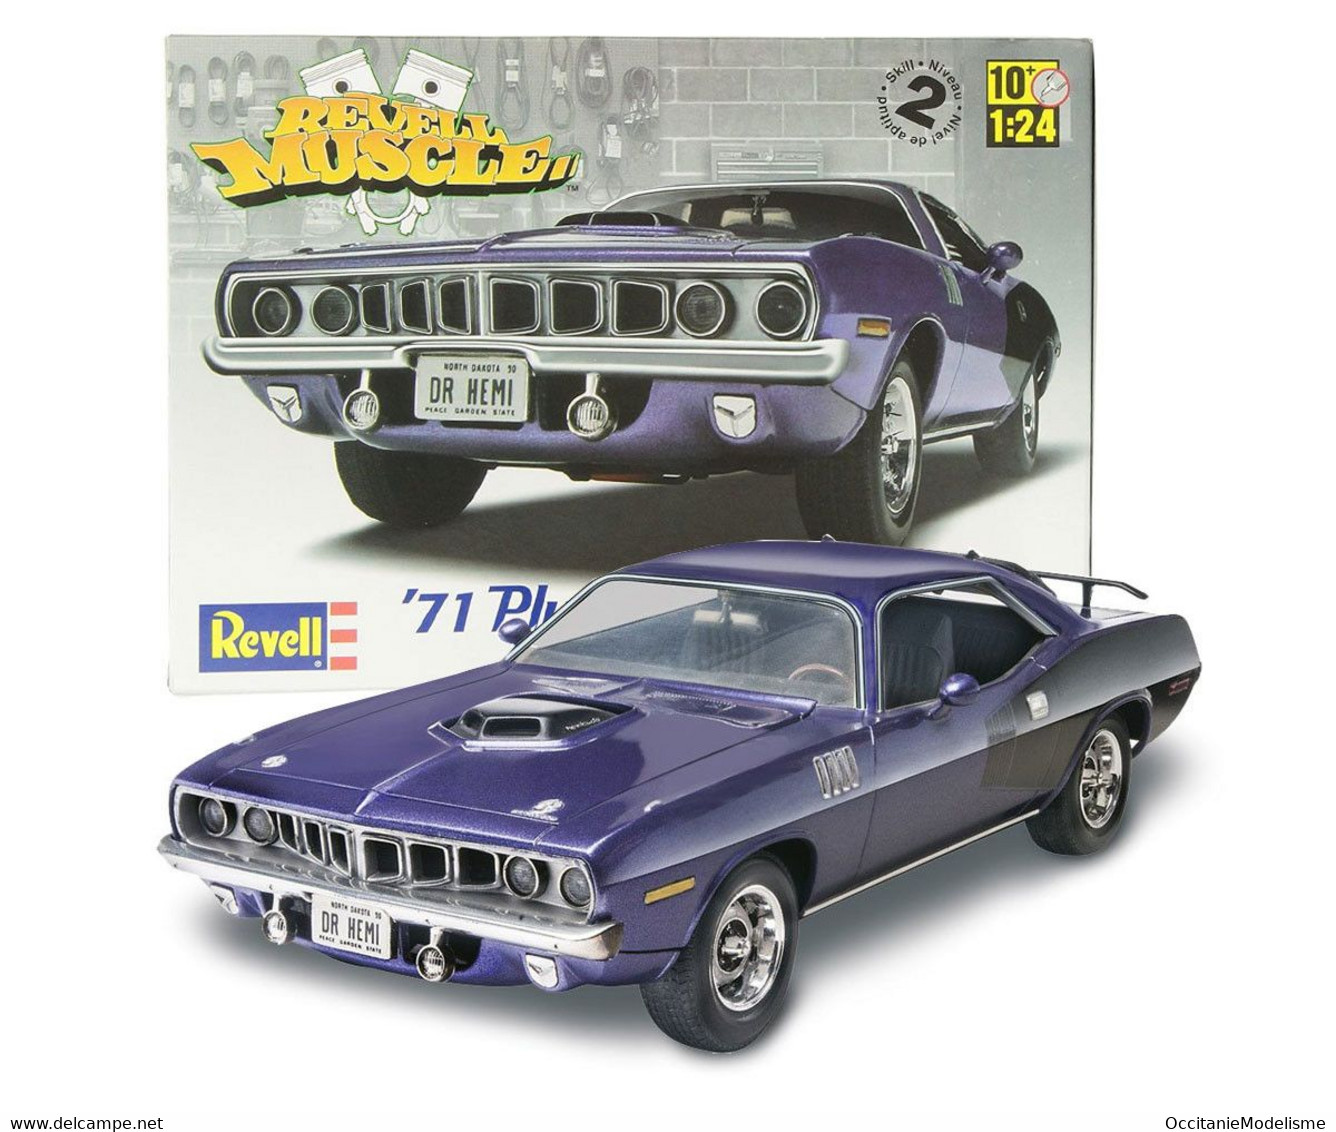 Revell - PLYMOUTH HEMI CUDA 426 1971 Maquette Kit Plastique Réf. 12943 85-2943 Neuf NBO 1/24 - Voitures